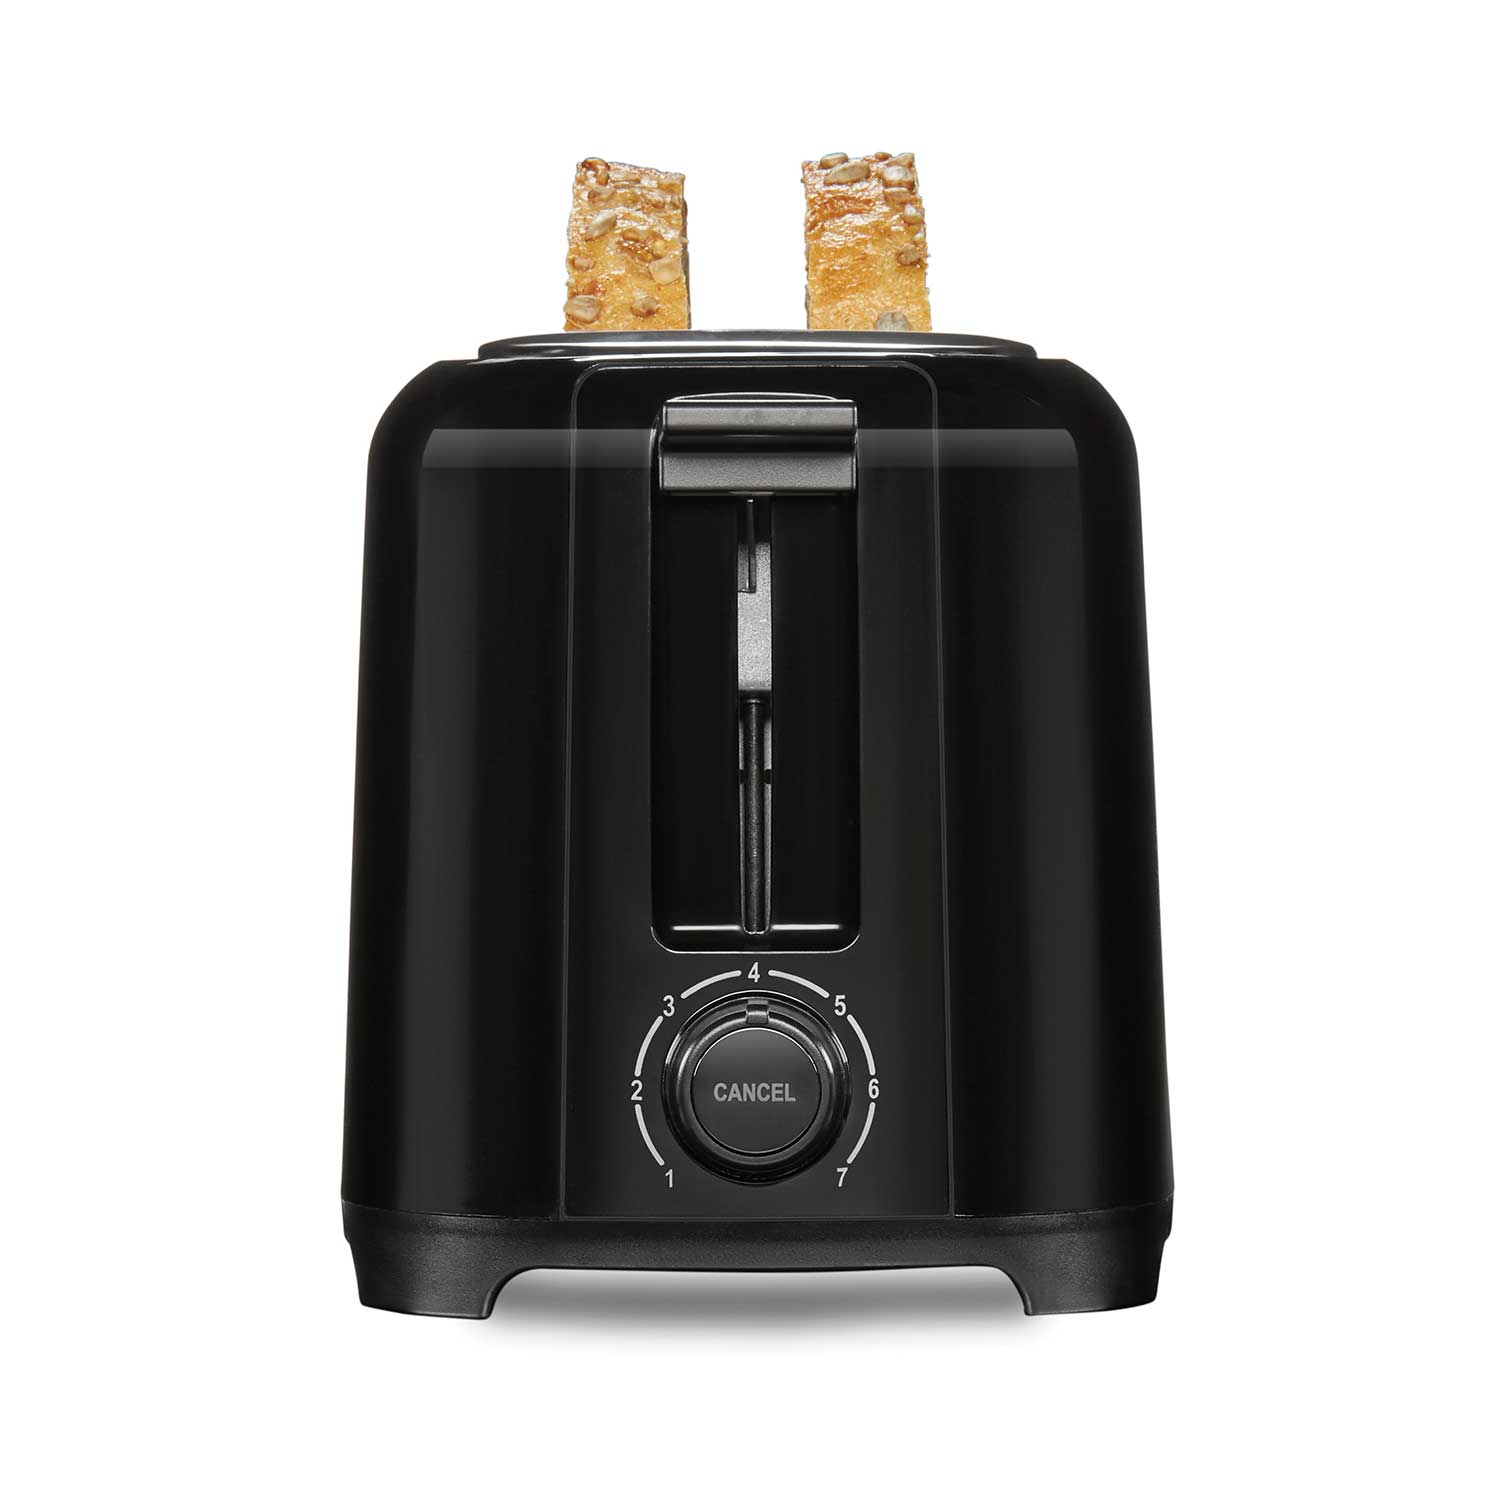 Wide-Slot 2 Slice Toaster - 22215PS